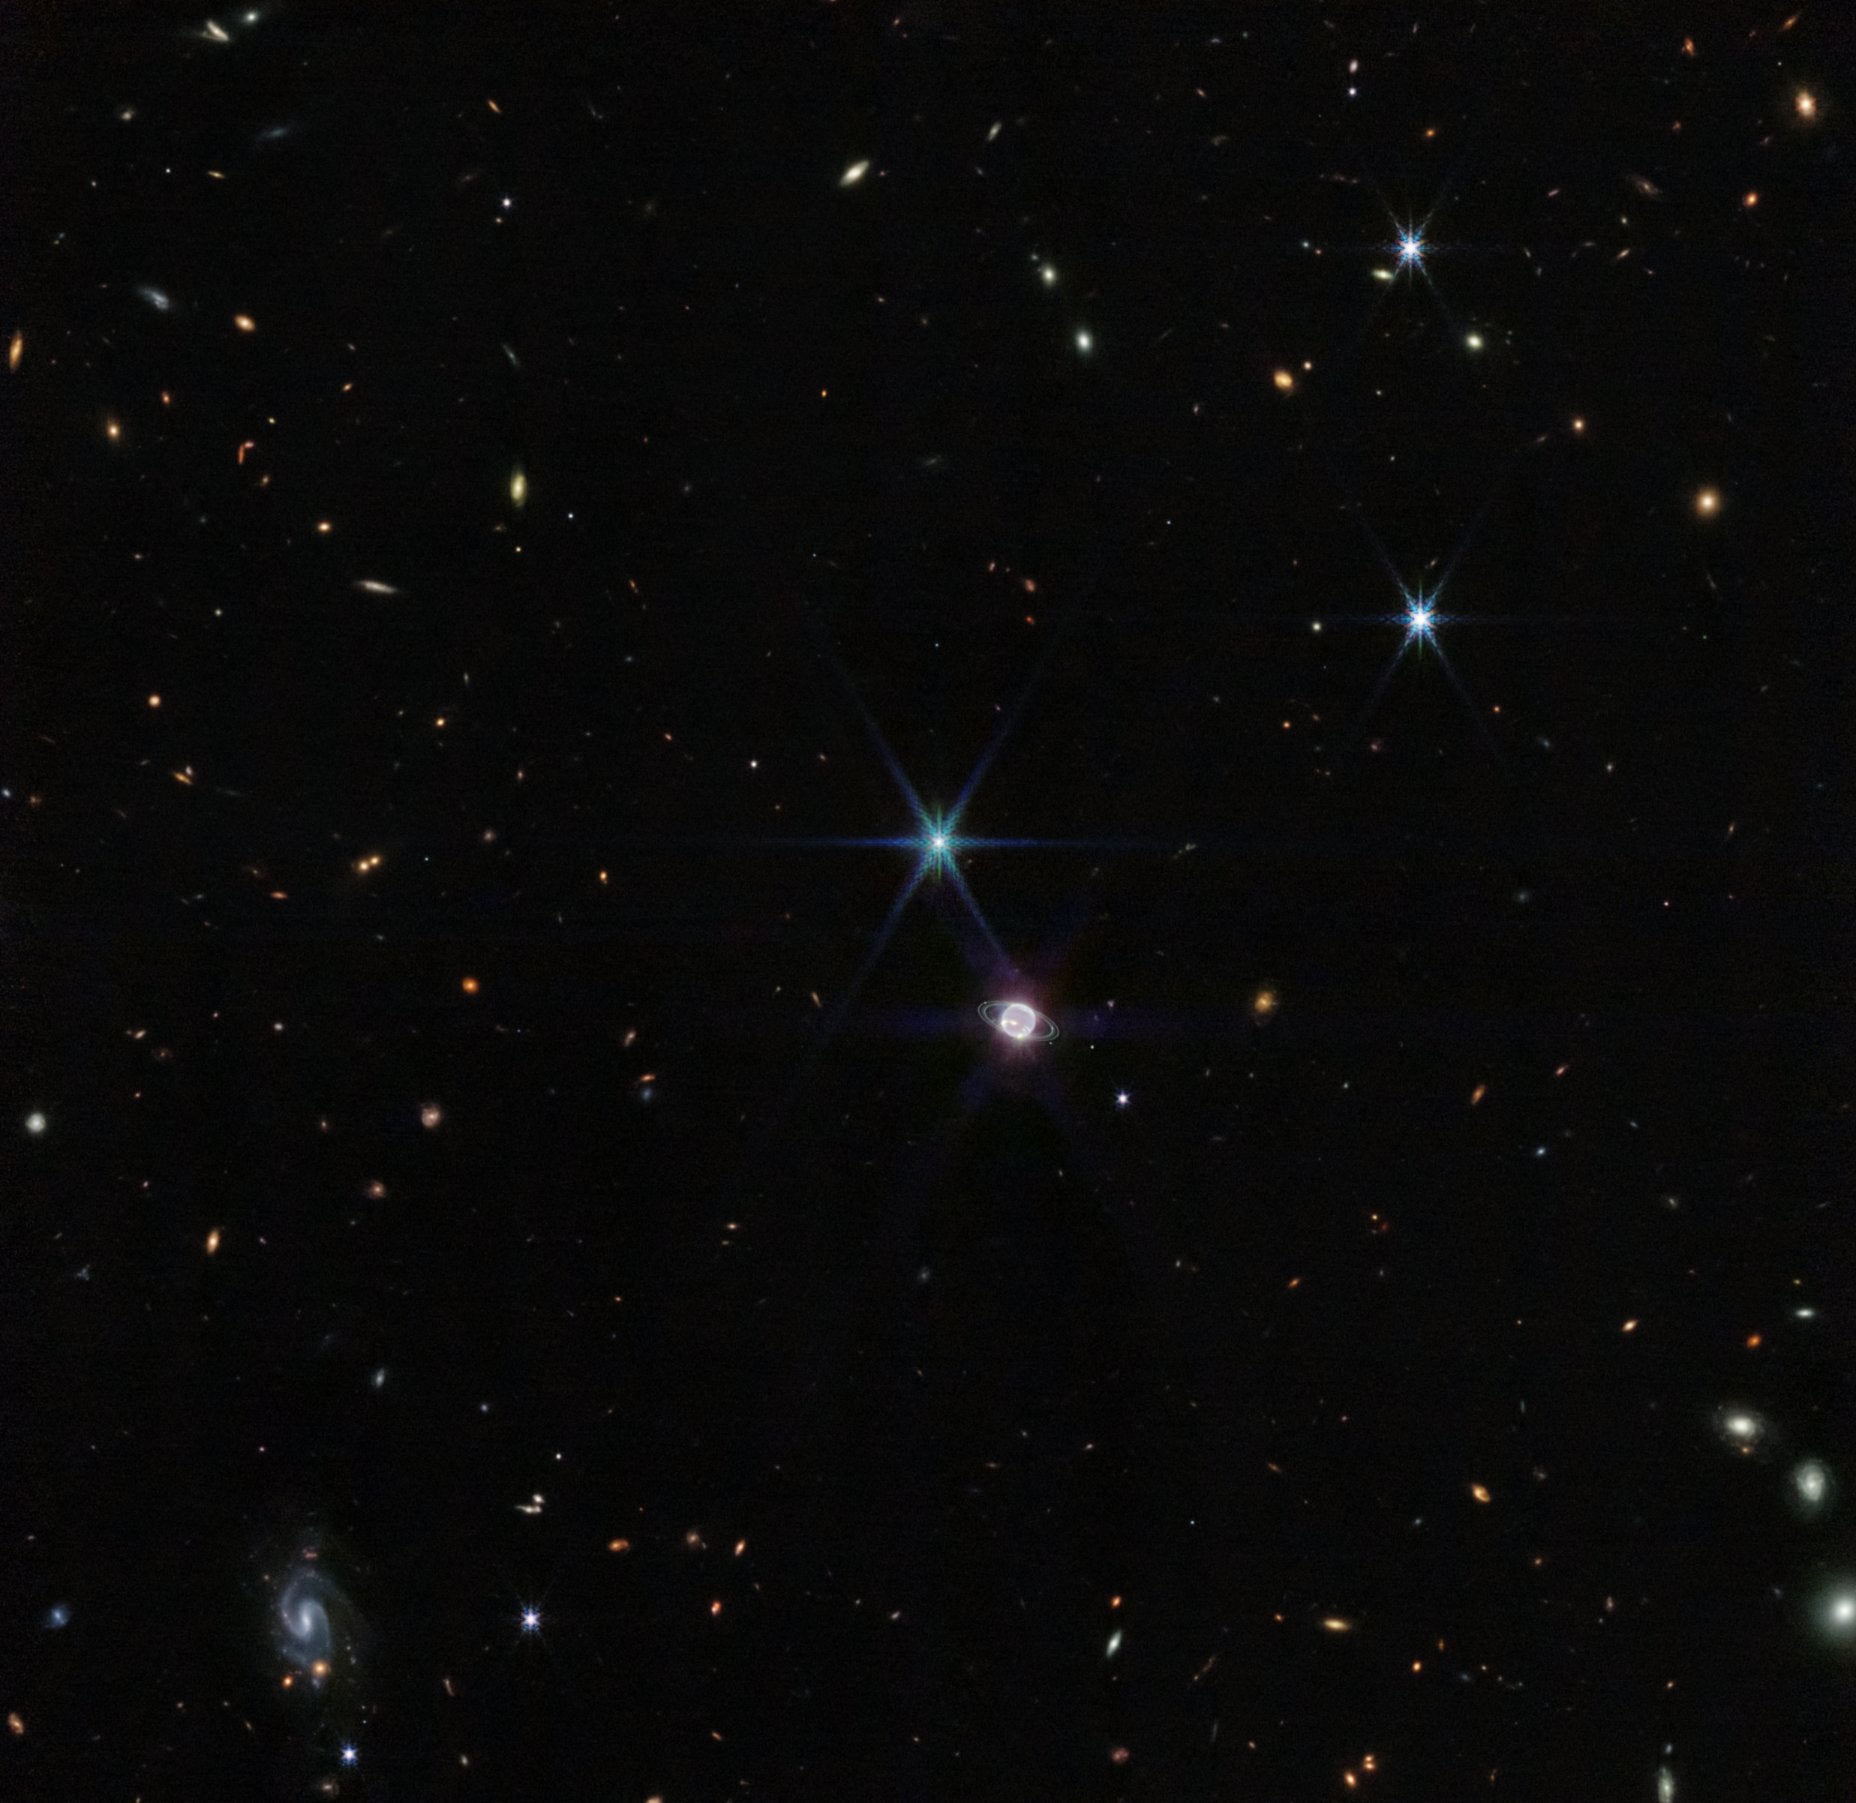 The latest James Webb Space Telescope image shows a glowing Neptune amidst a sea of stars